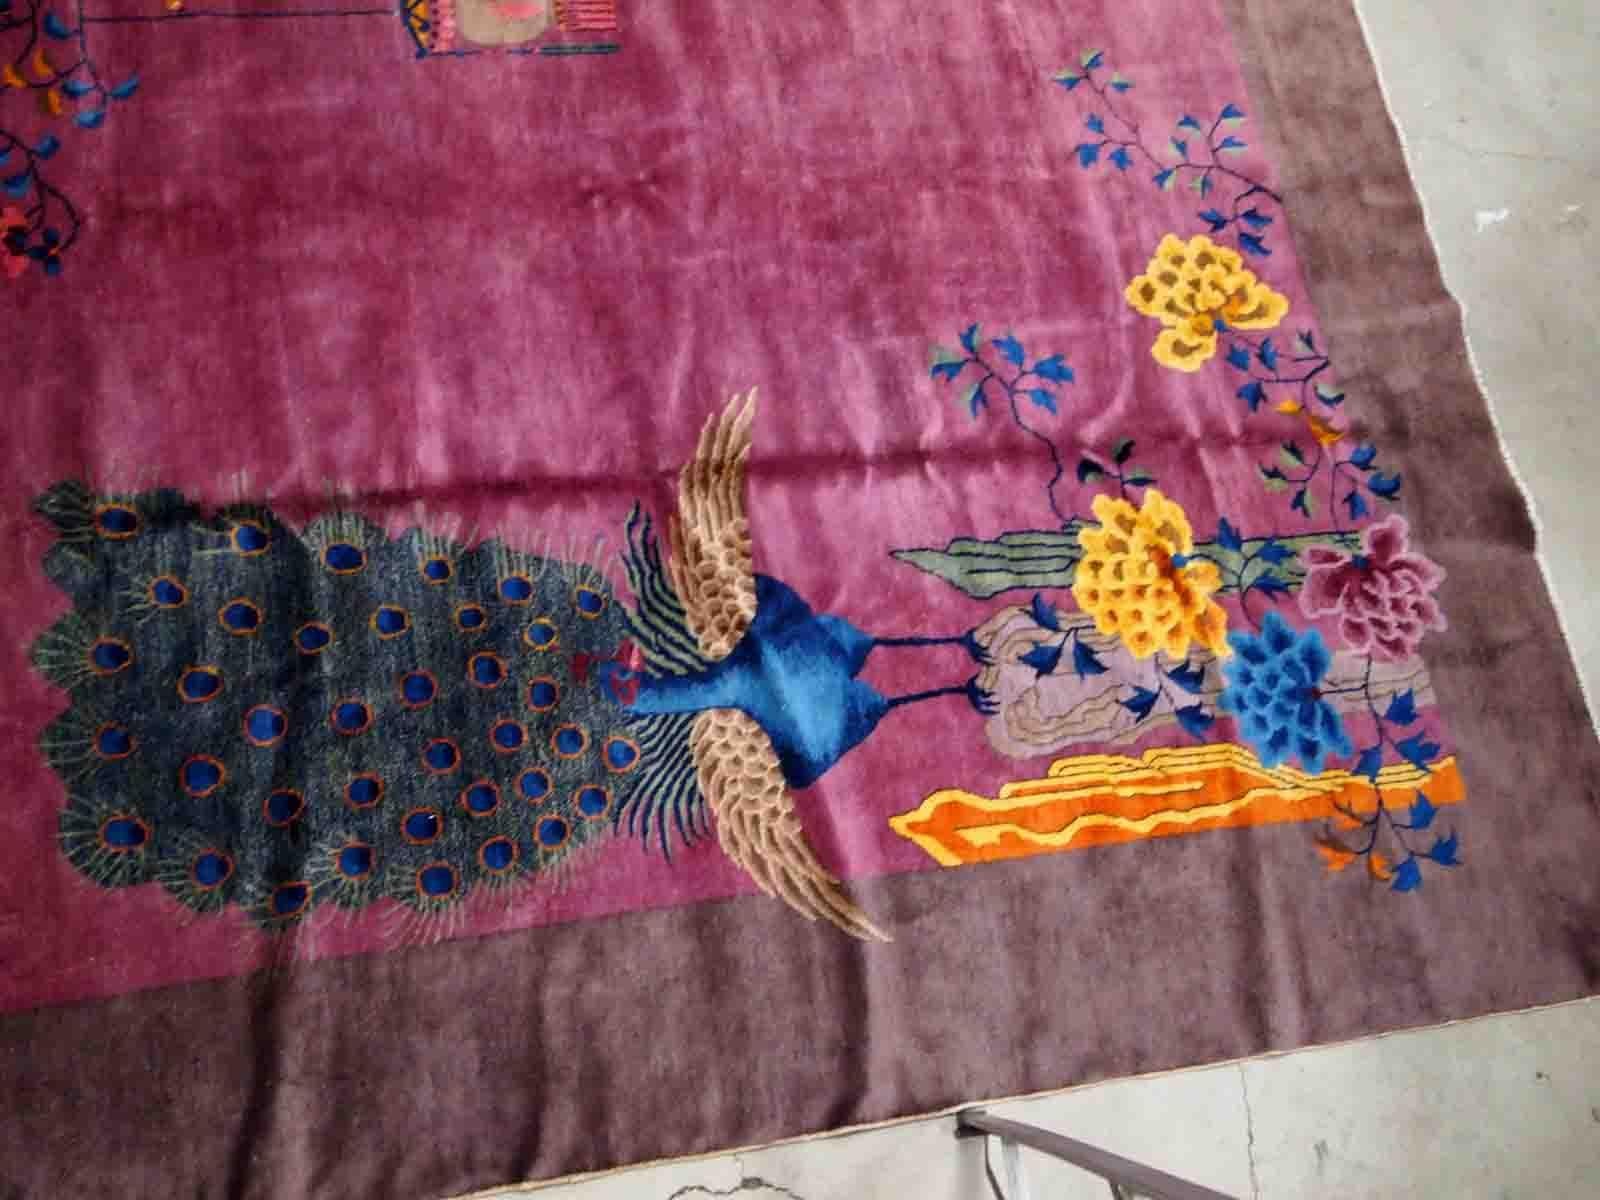 Handmade antique Art Deco Chinese rug in ruby and burgundy shades. The rug is from the beginning of 20th century in original good condition. It has some floral accent with large peacock on it.

-condition: original good,

-circa: